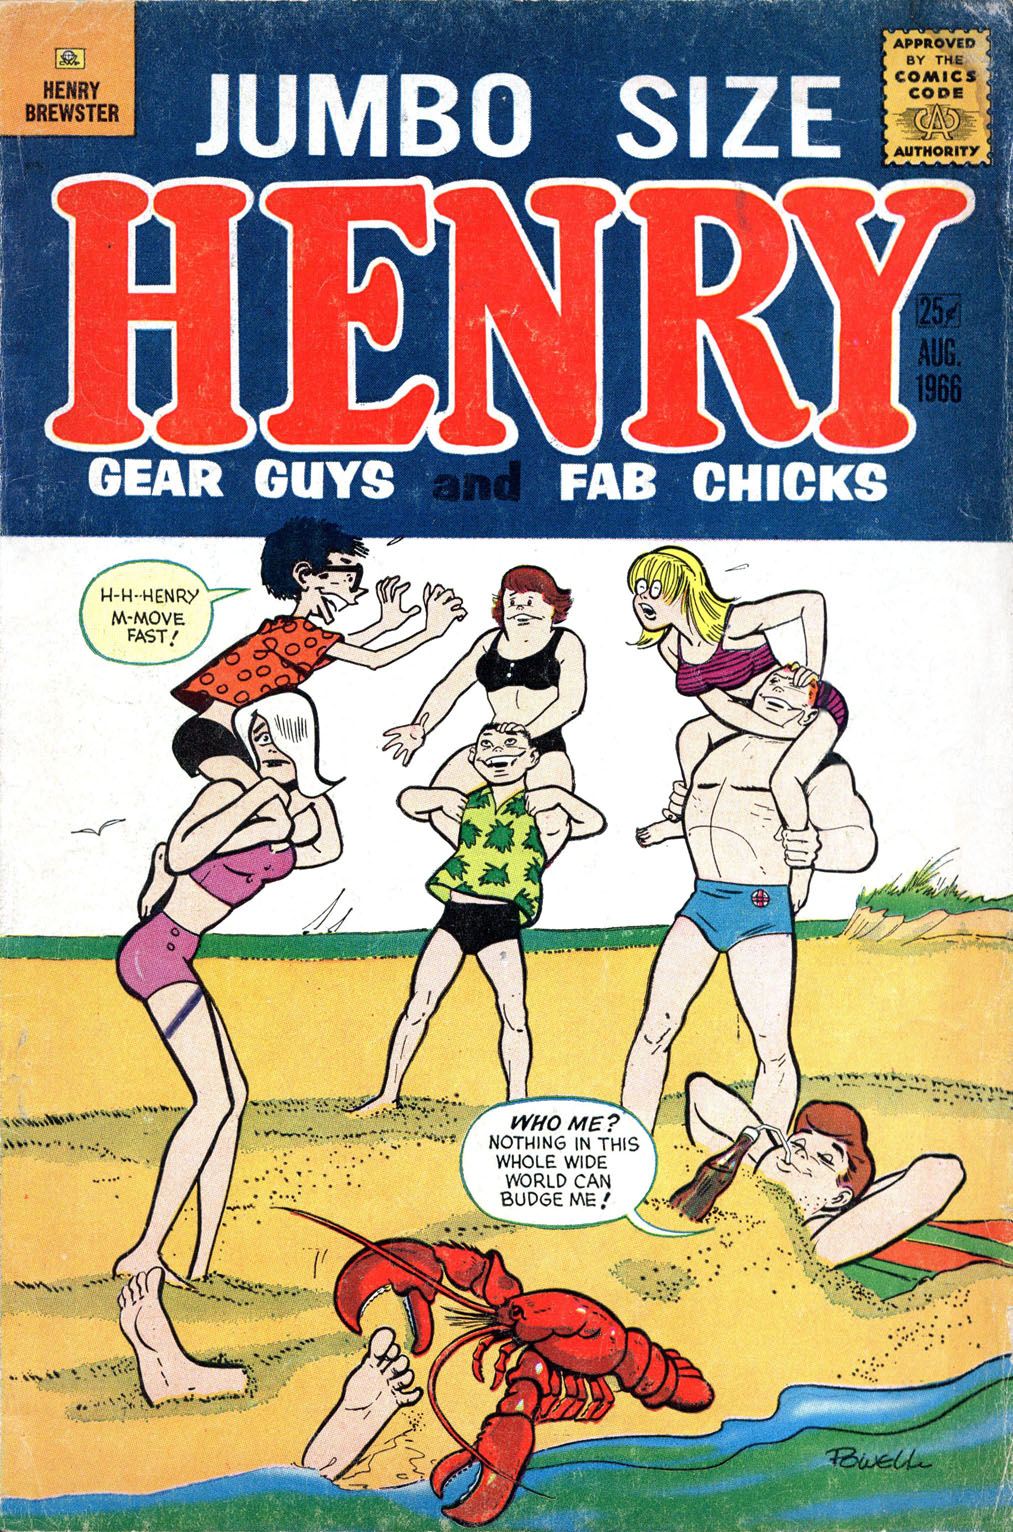 Read online Henry Brewster comic -  Issue #4 - 1